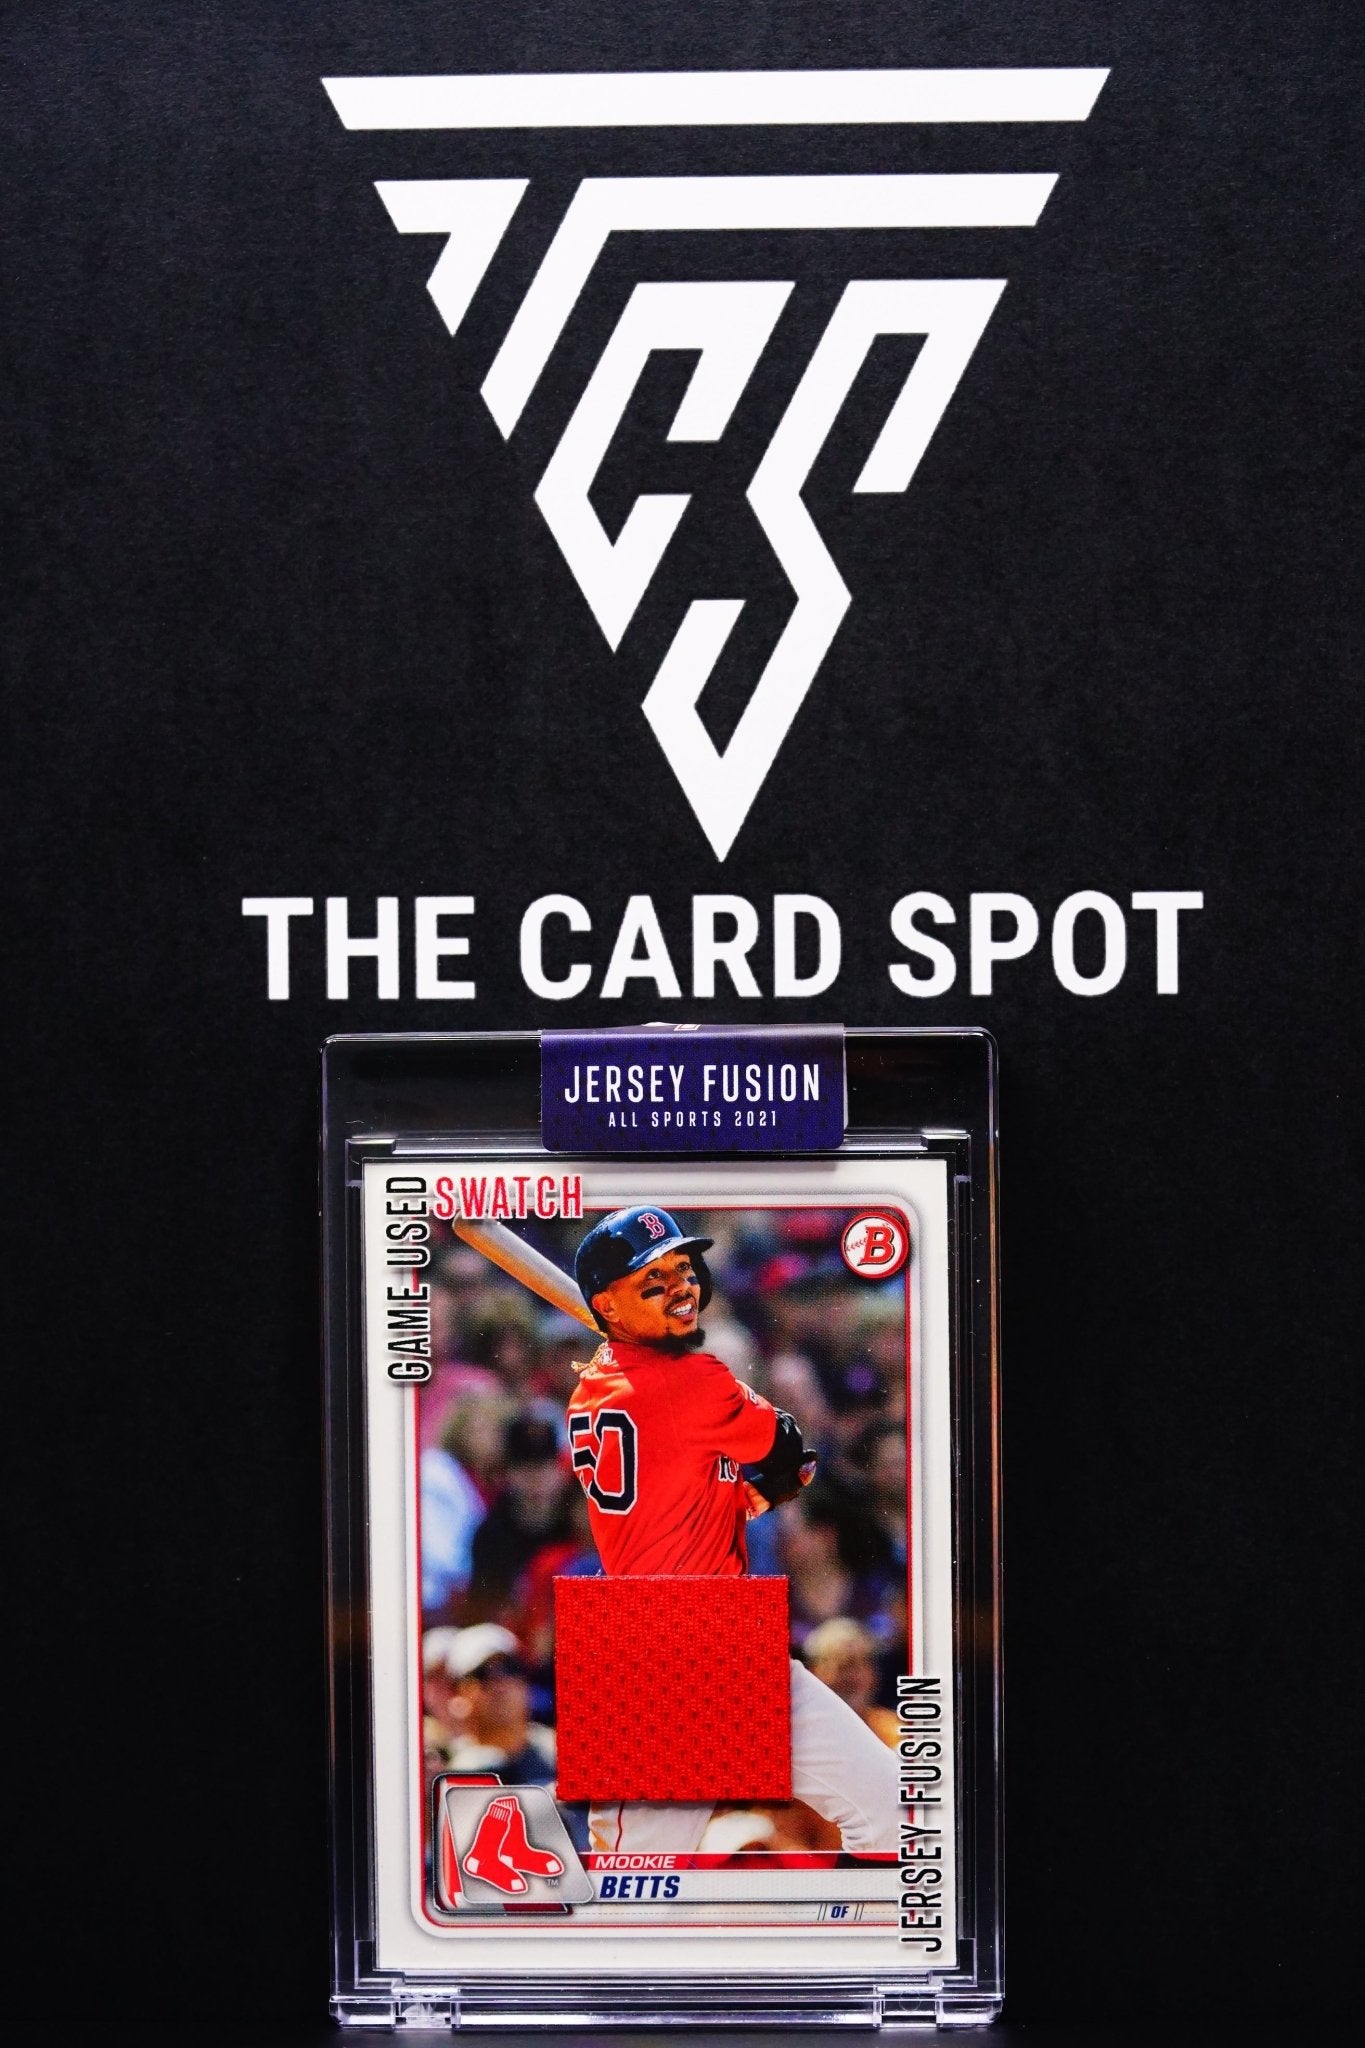 Baseball Card: Mookie Betts GAME USED - THE CARD SPOT PTY LTD.Sports CardJersey Fusion